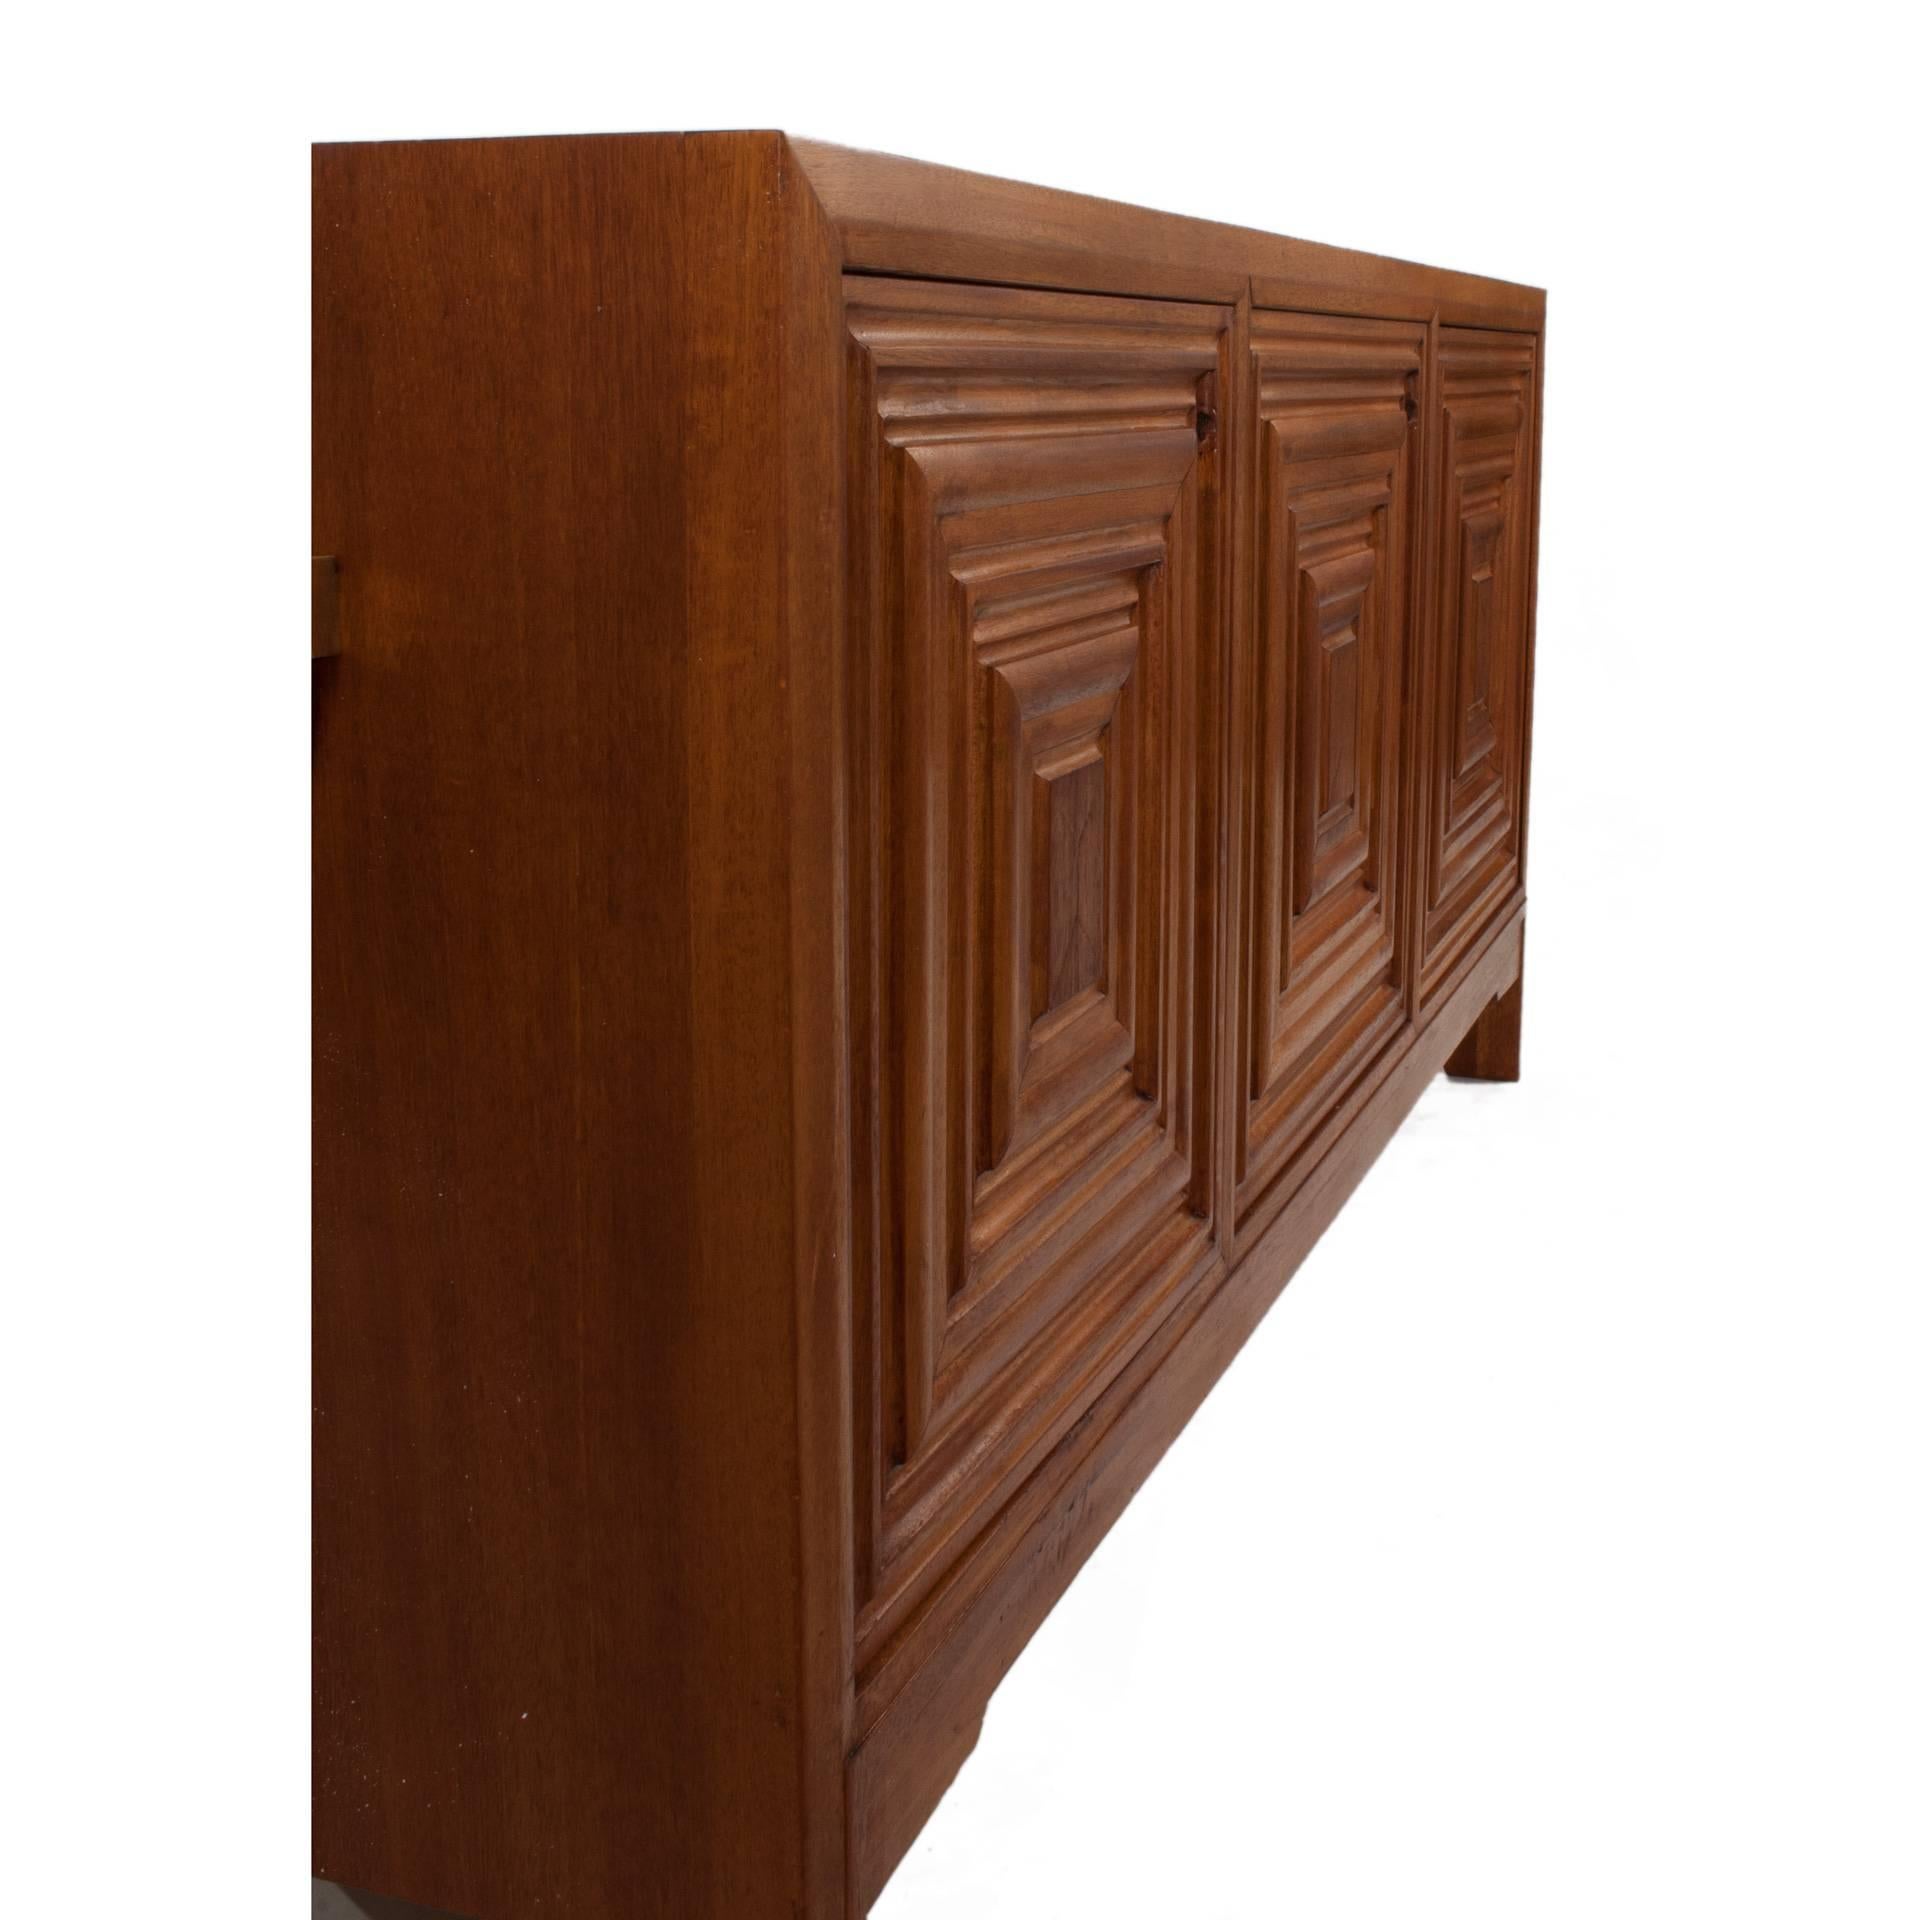 Sideboard by Oscar Nilsson In Excellent Condition For Sale In Los Angeles, CA